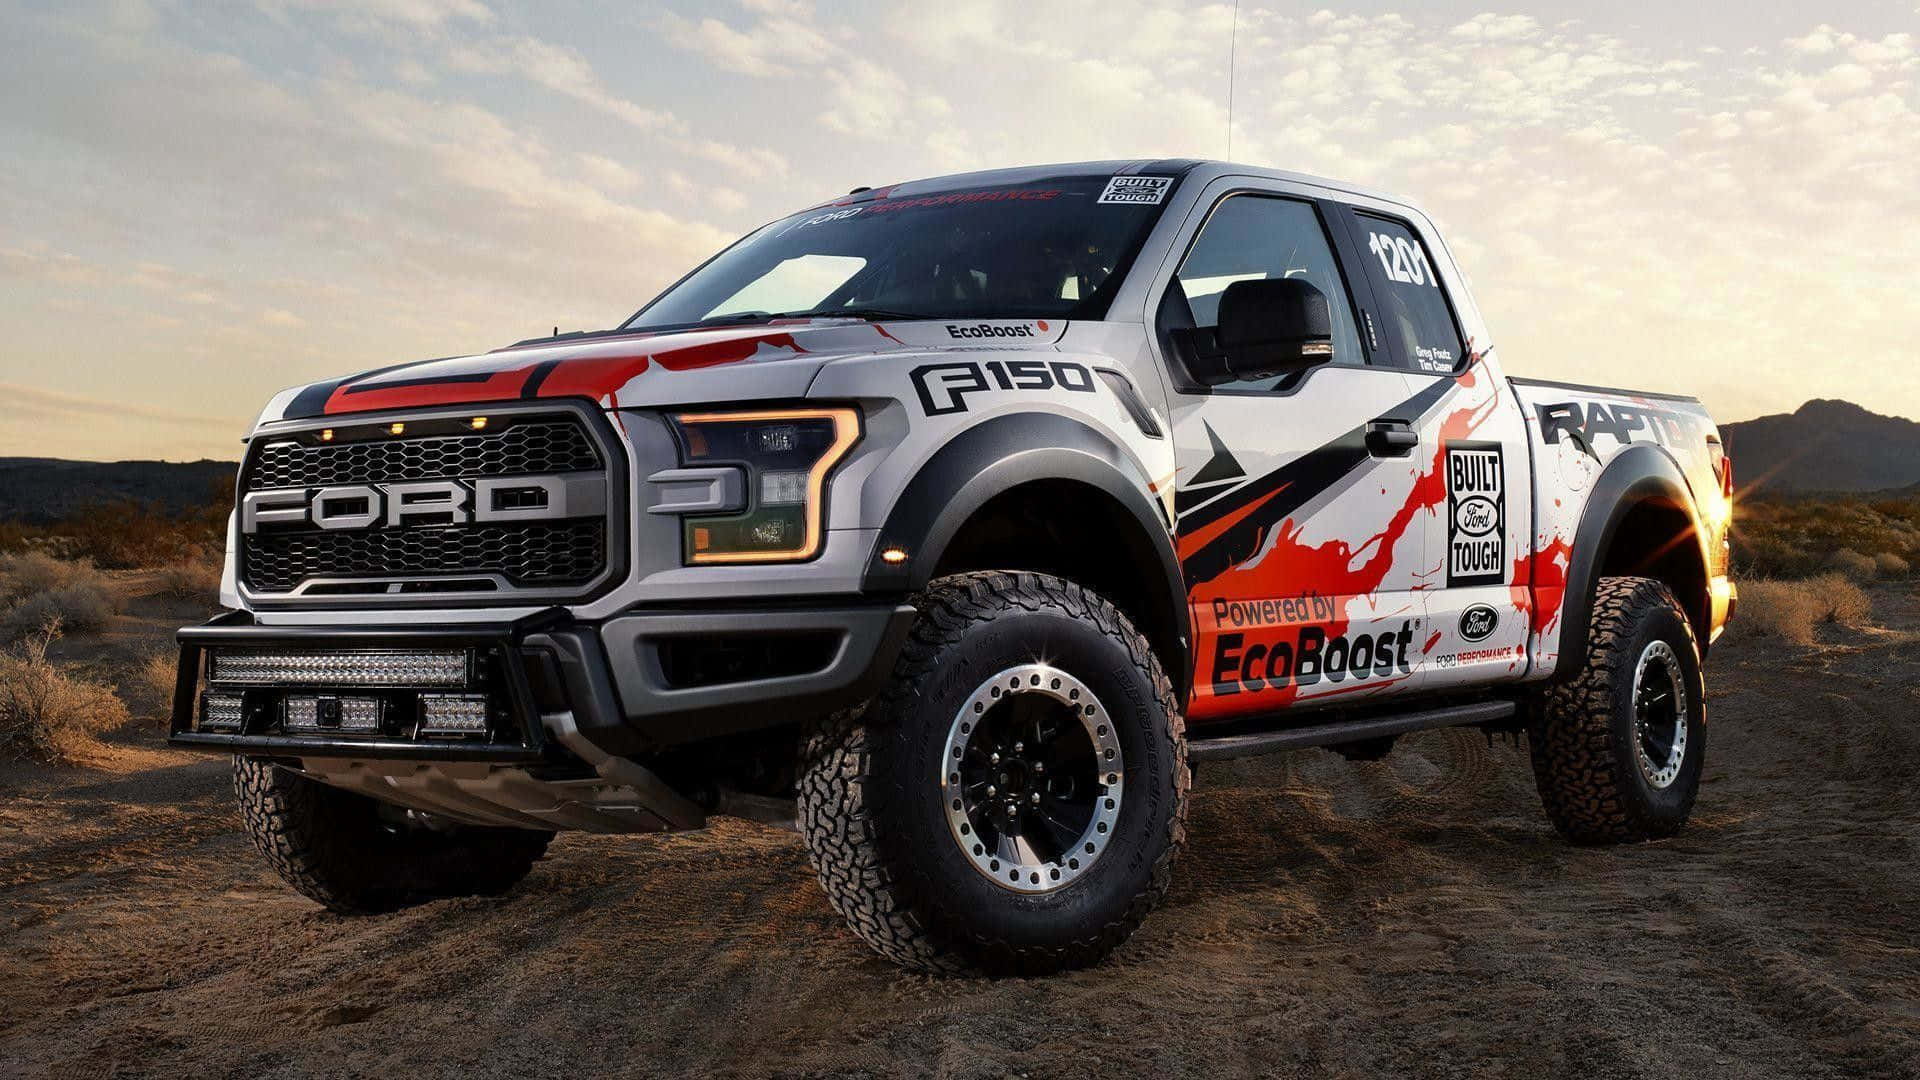 The Ford F - 150 Rpc Is Driving On A Dirt Road